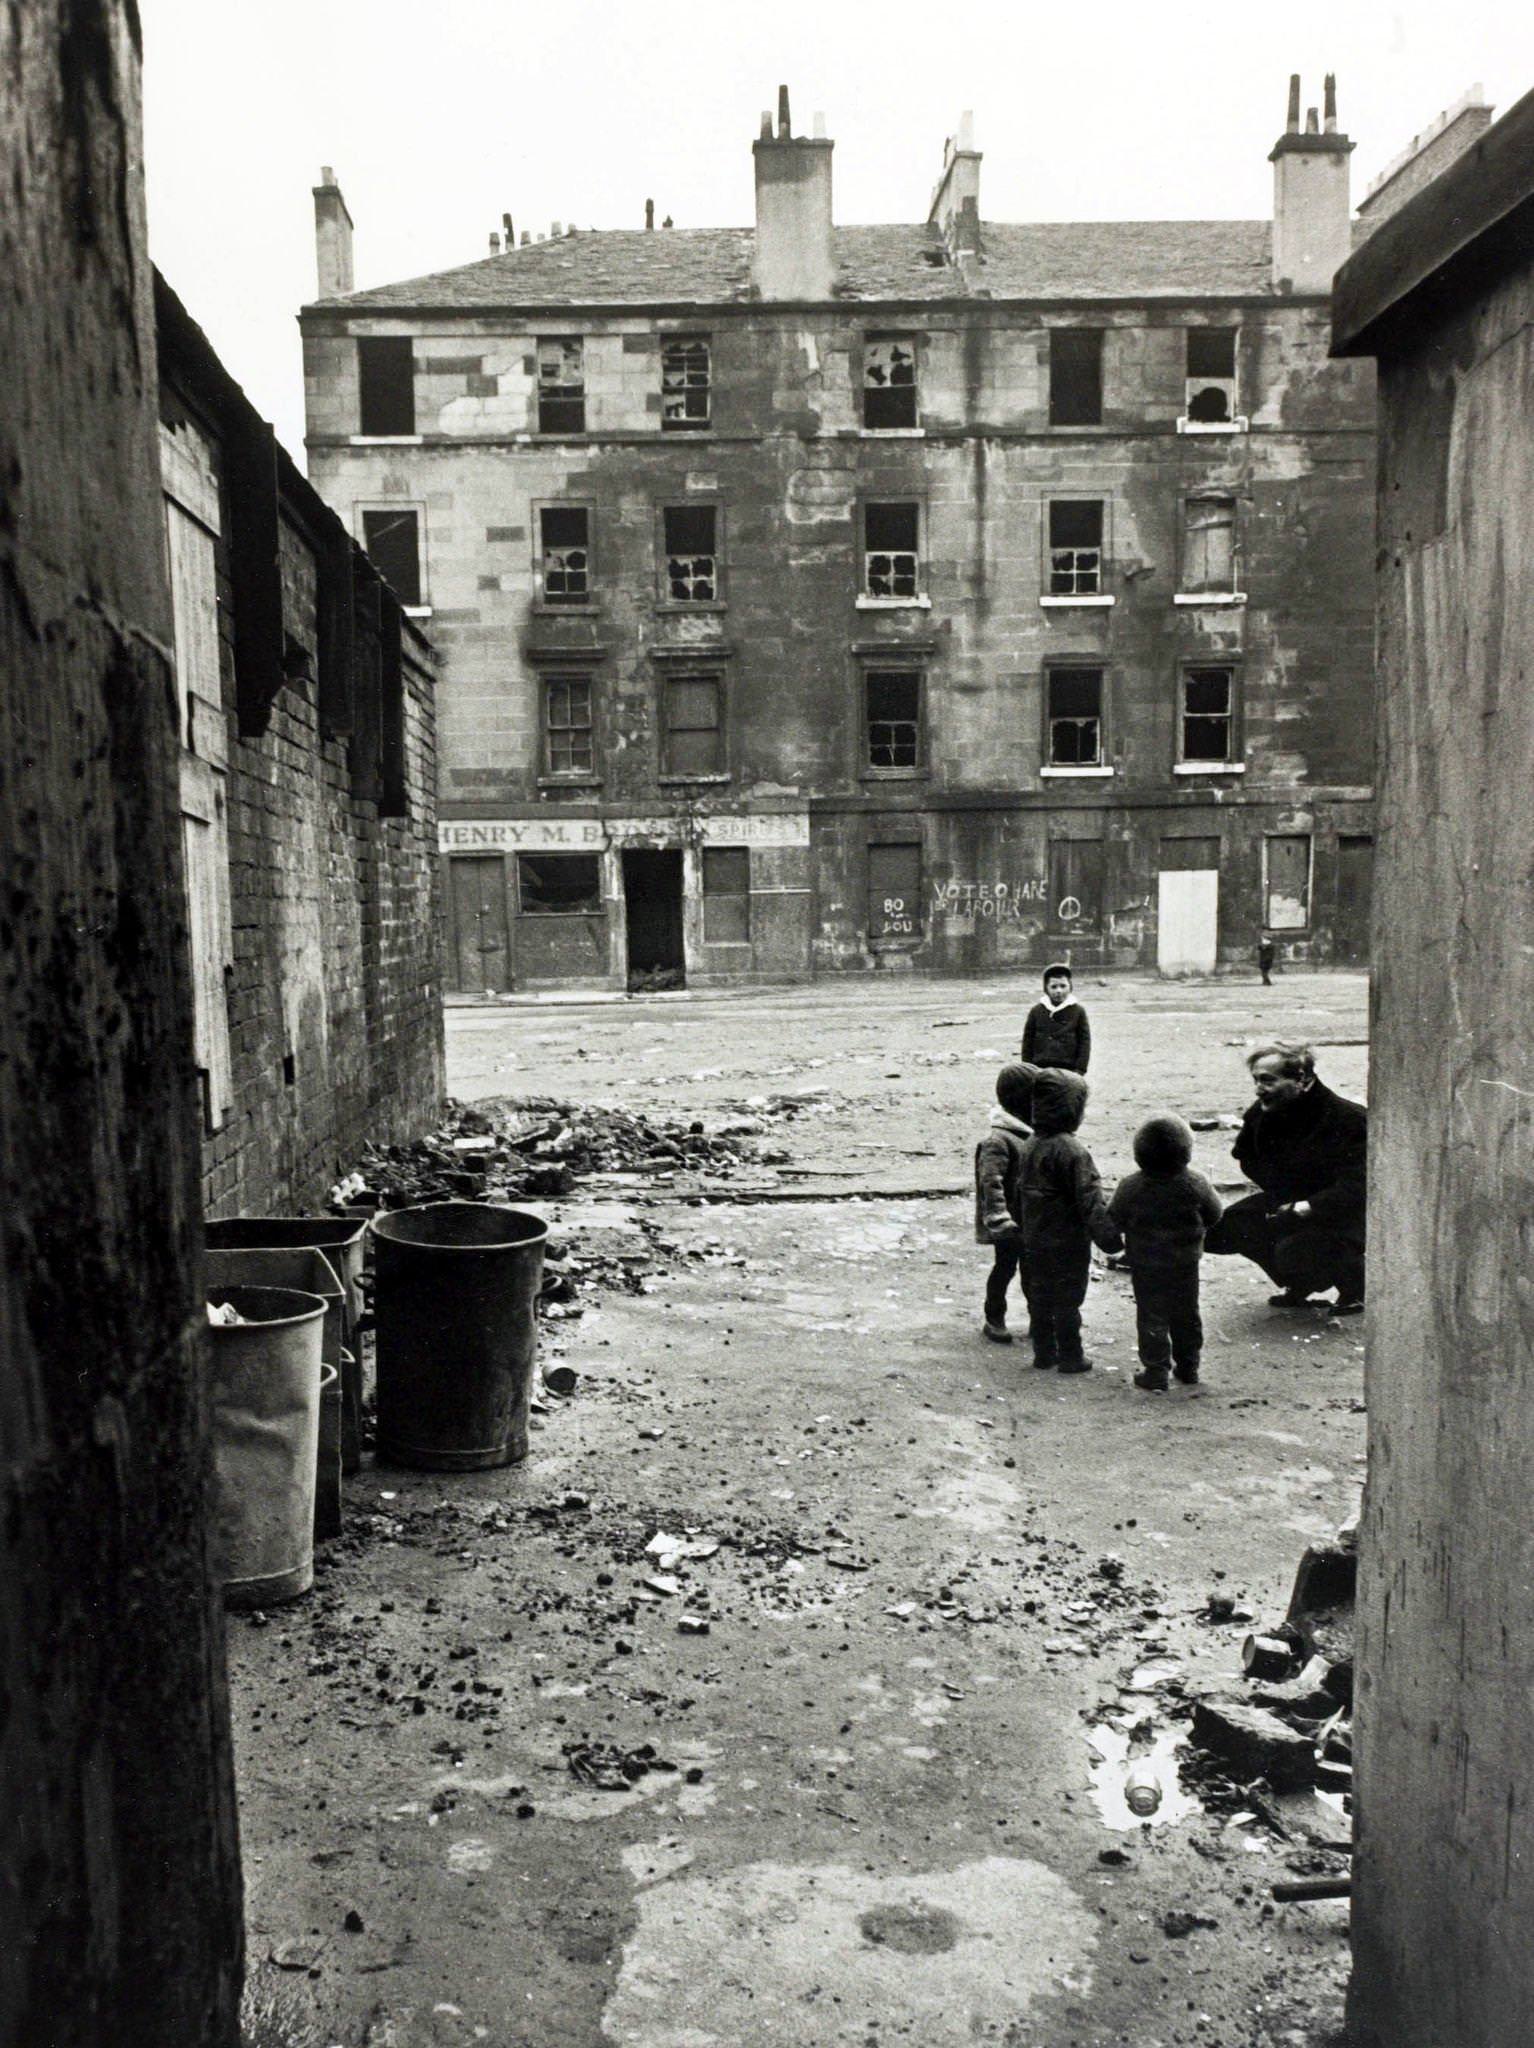 A scene in the Gorbals area of Glasgow, Scotland, showing the slums about to be cleared for new flats, 1966